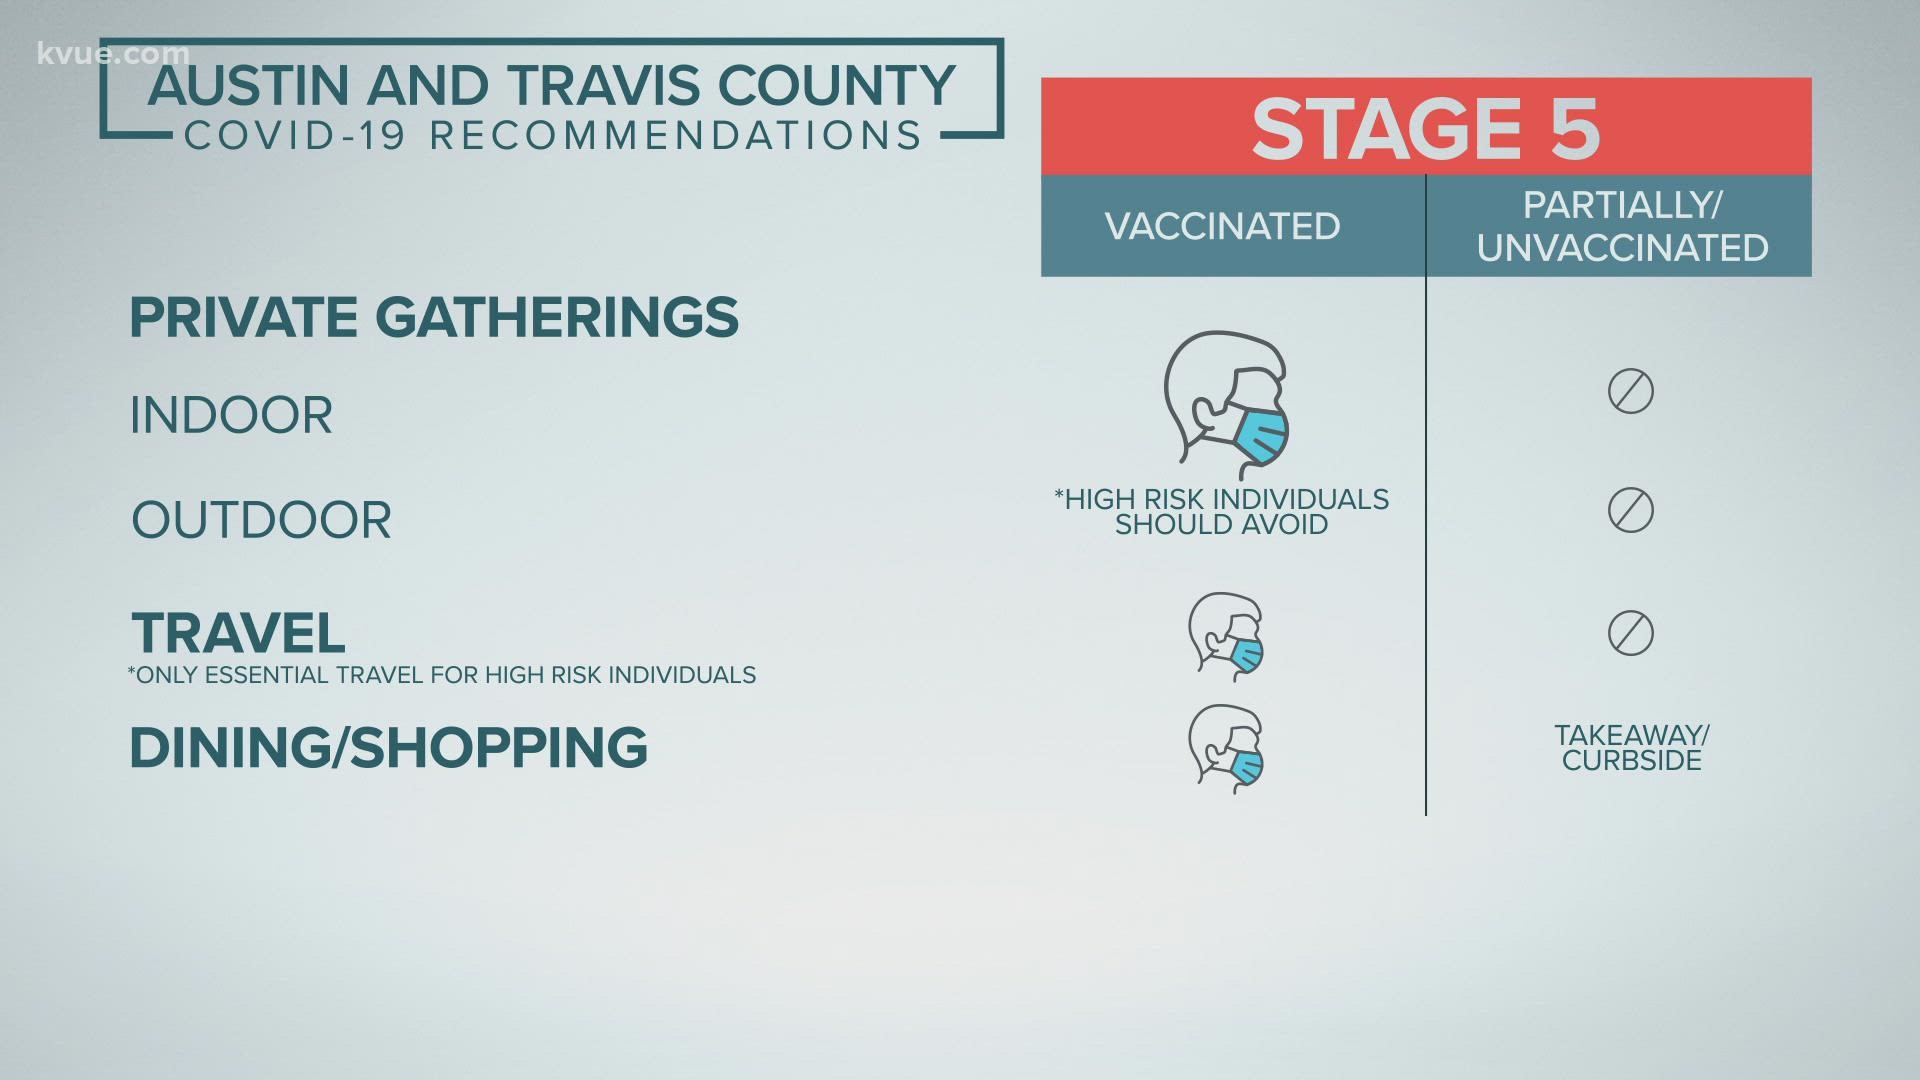 Austin-Travis County is now under Stage 5 COVID-19 guidelines. KVUE's Conner Board explains how we got here and what the new guidelines are.